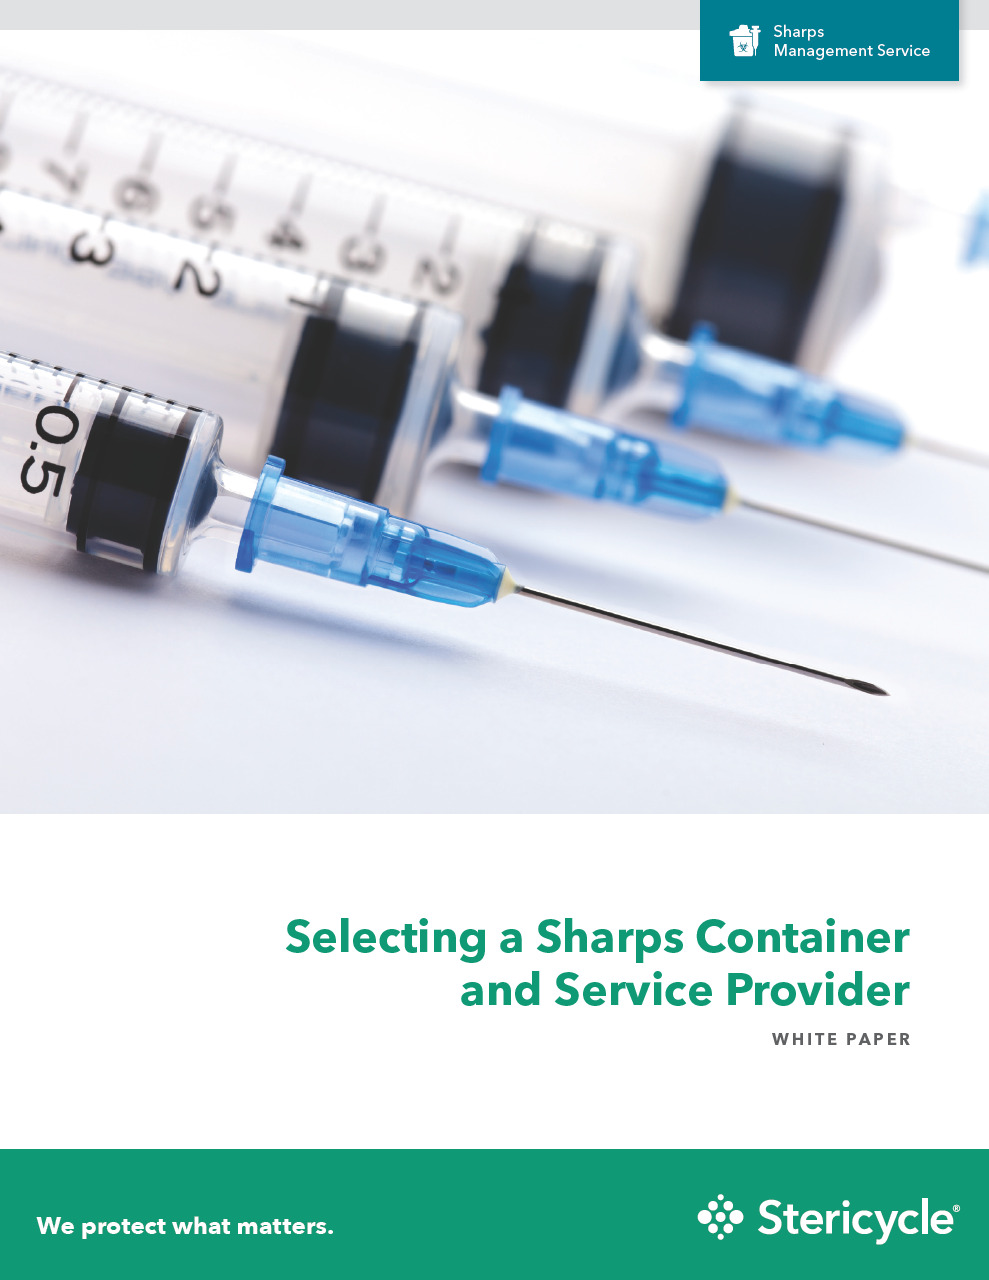 STC-Selecting-A-Sharps-Container_White-Paper_2018-02.pdf